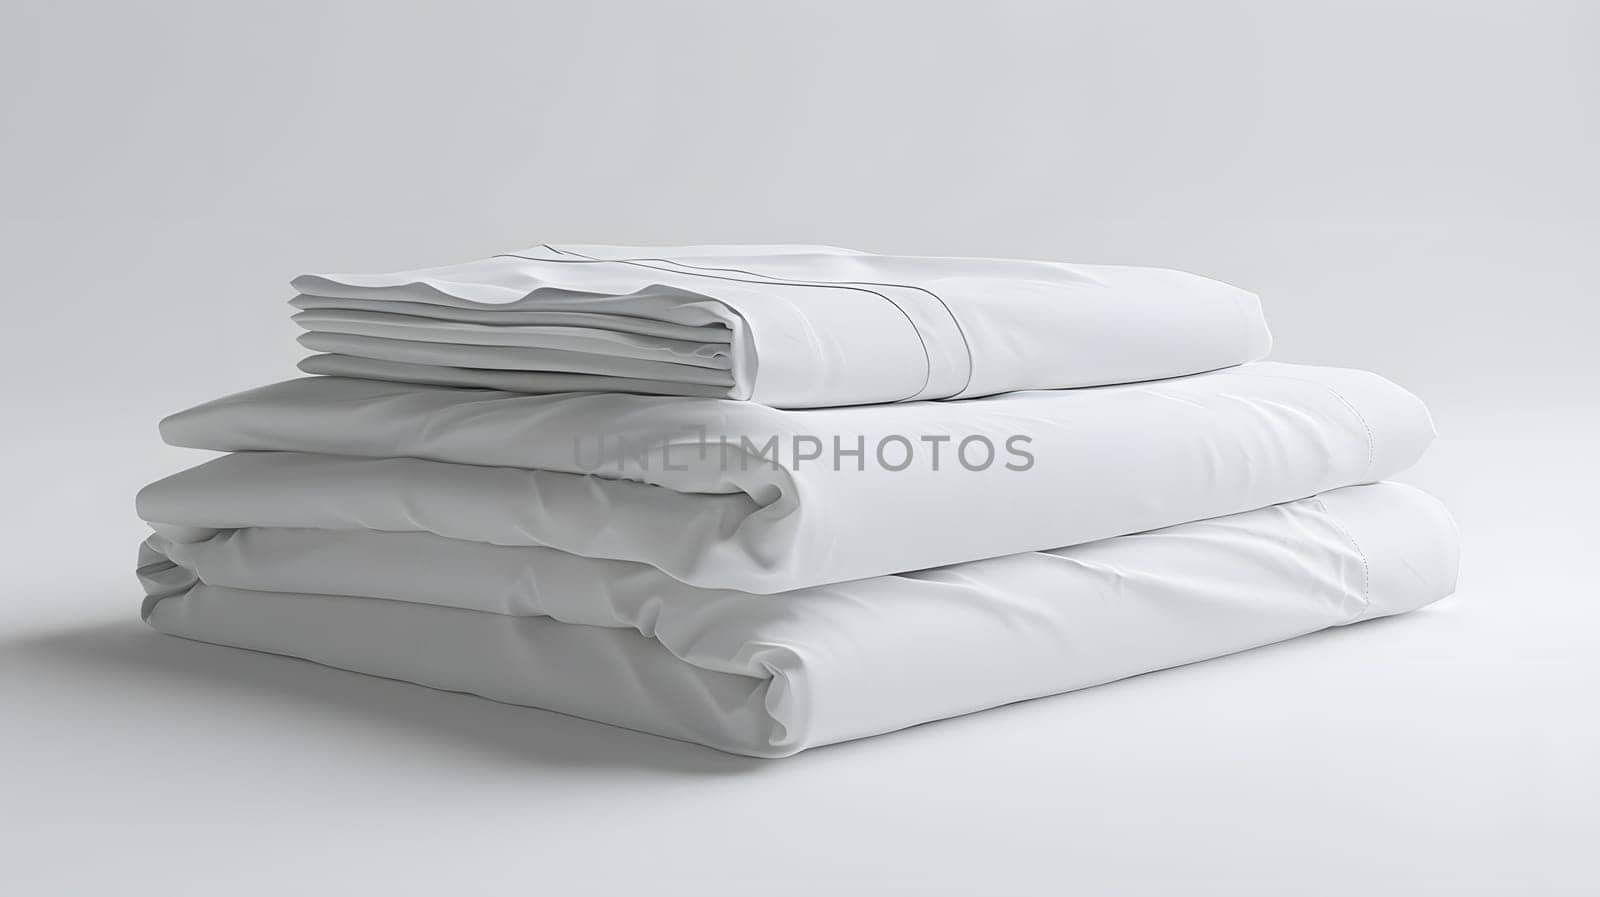 A stack of clean white linens and pillows neatly arranged on a wooden surface, creating a stylish and minimalistic look